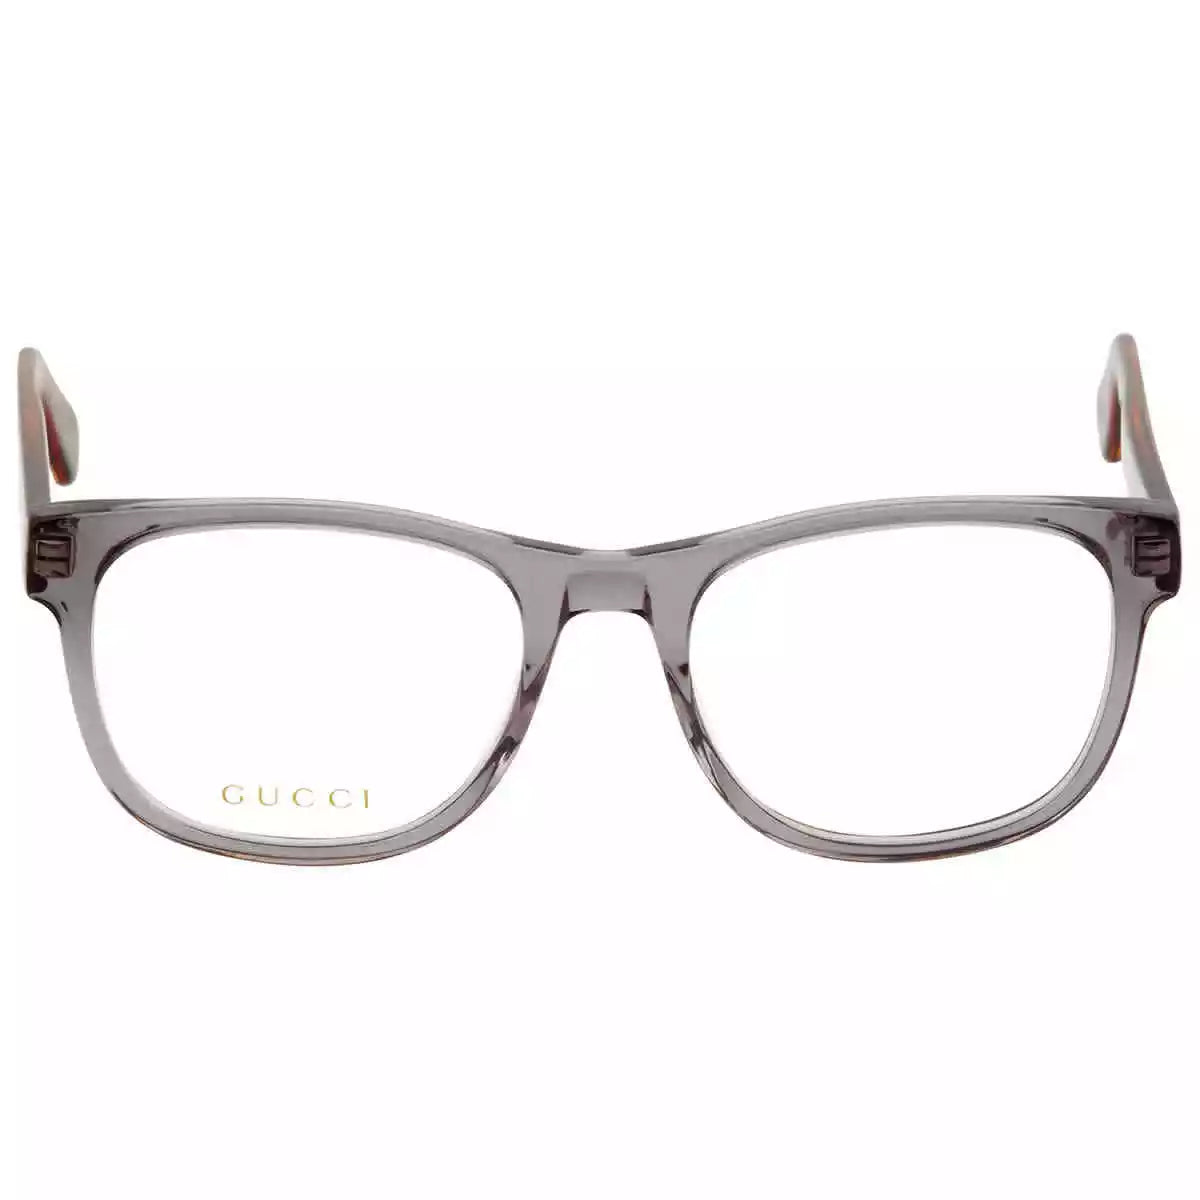 Gucci GG0004ON-004-53